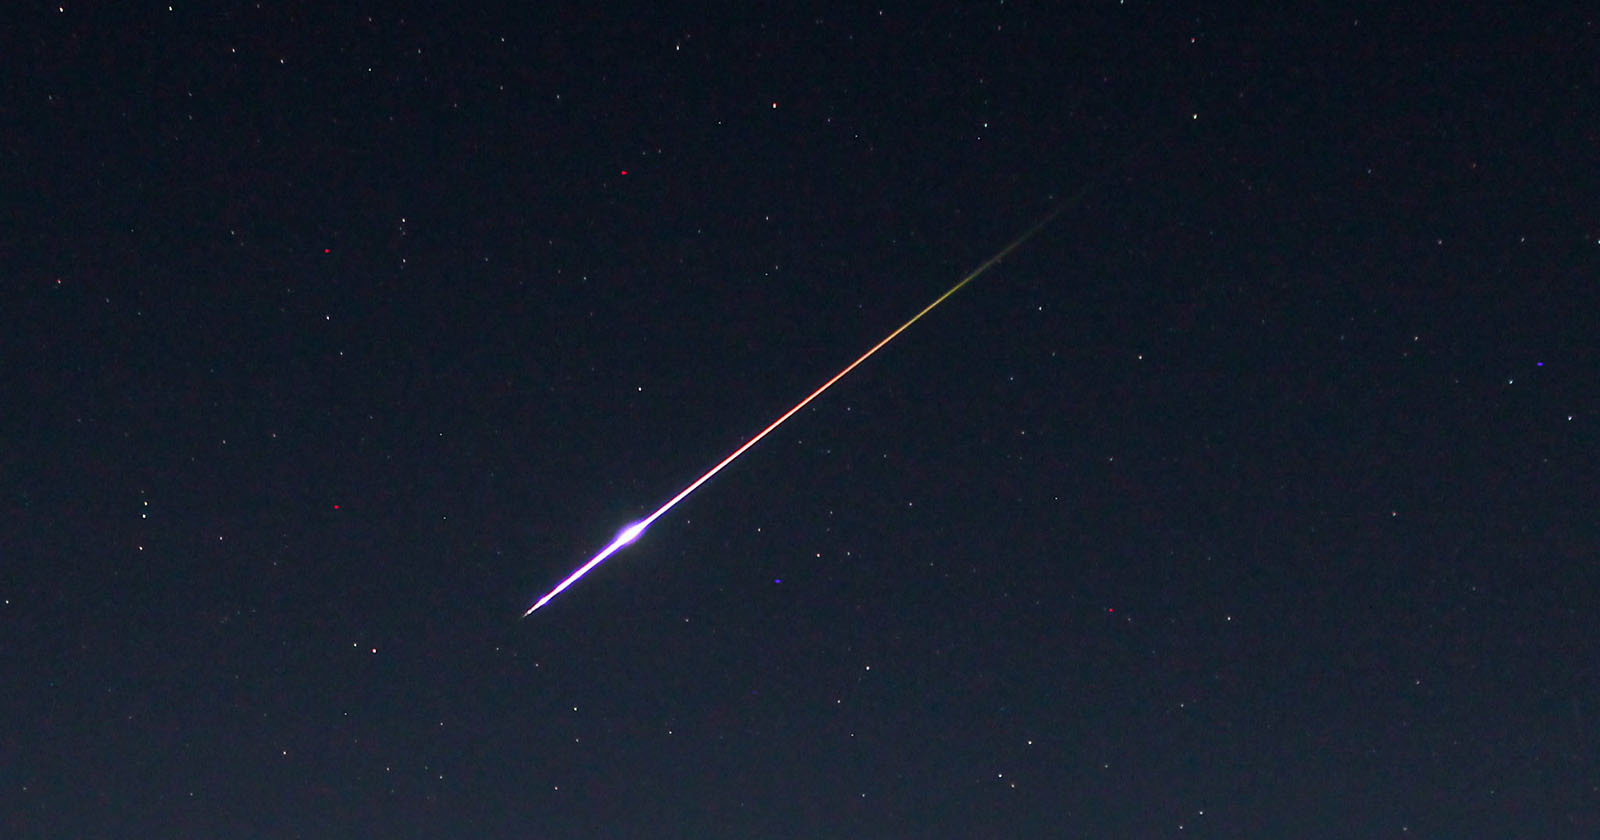 Meteor Video Flagged as Intimate Content Locks Photographer Out of Twitter